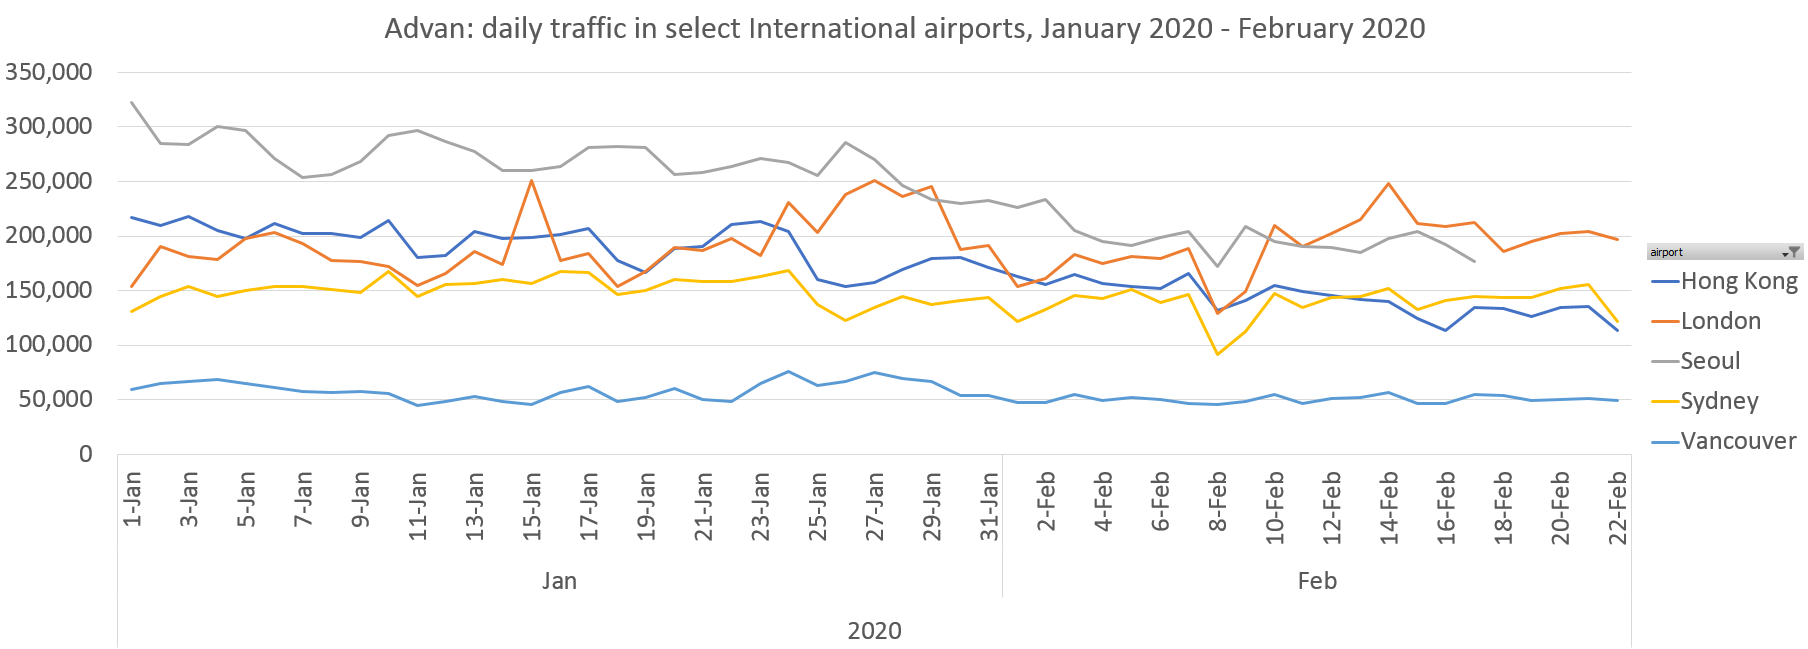 Advan: daily traffic in select International airports, January - February 2020